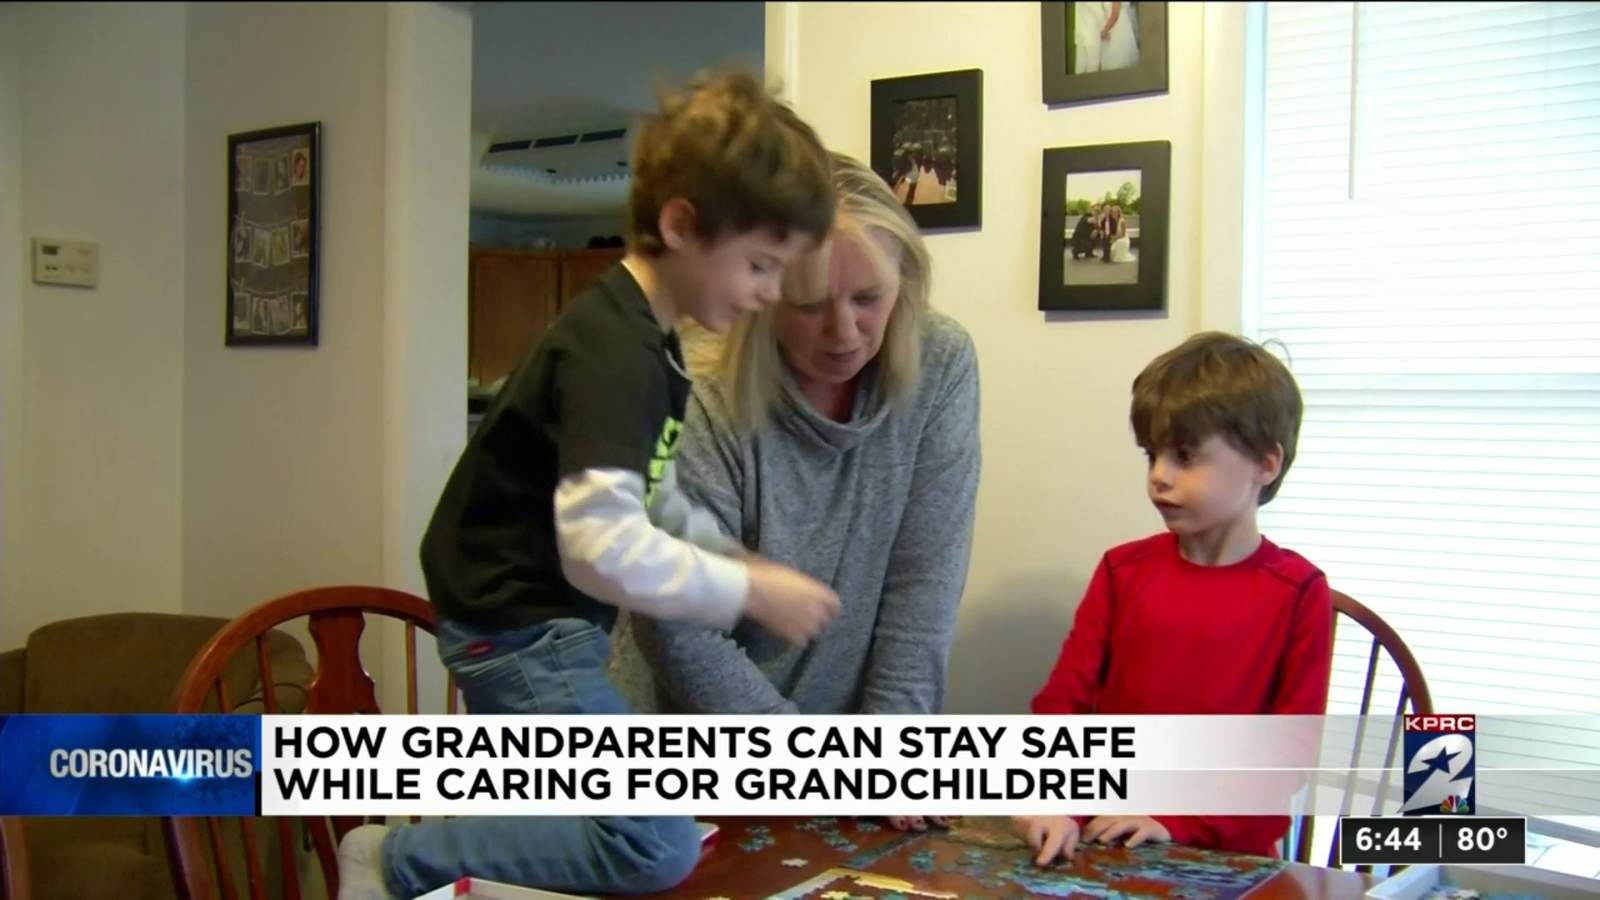 Advice for grandparents who cannot isolate during coronavirus